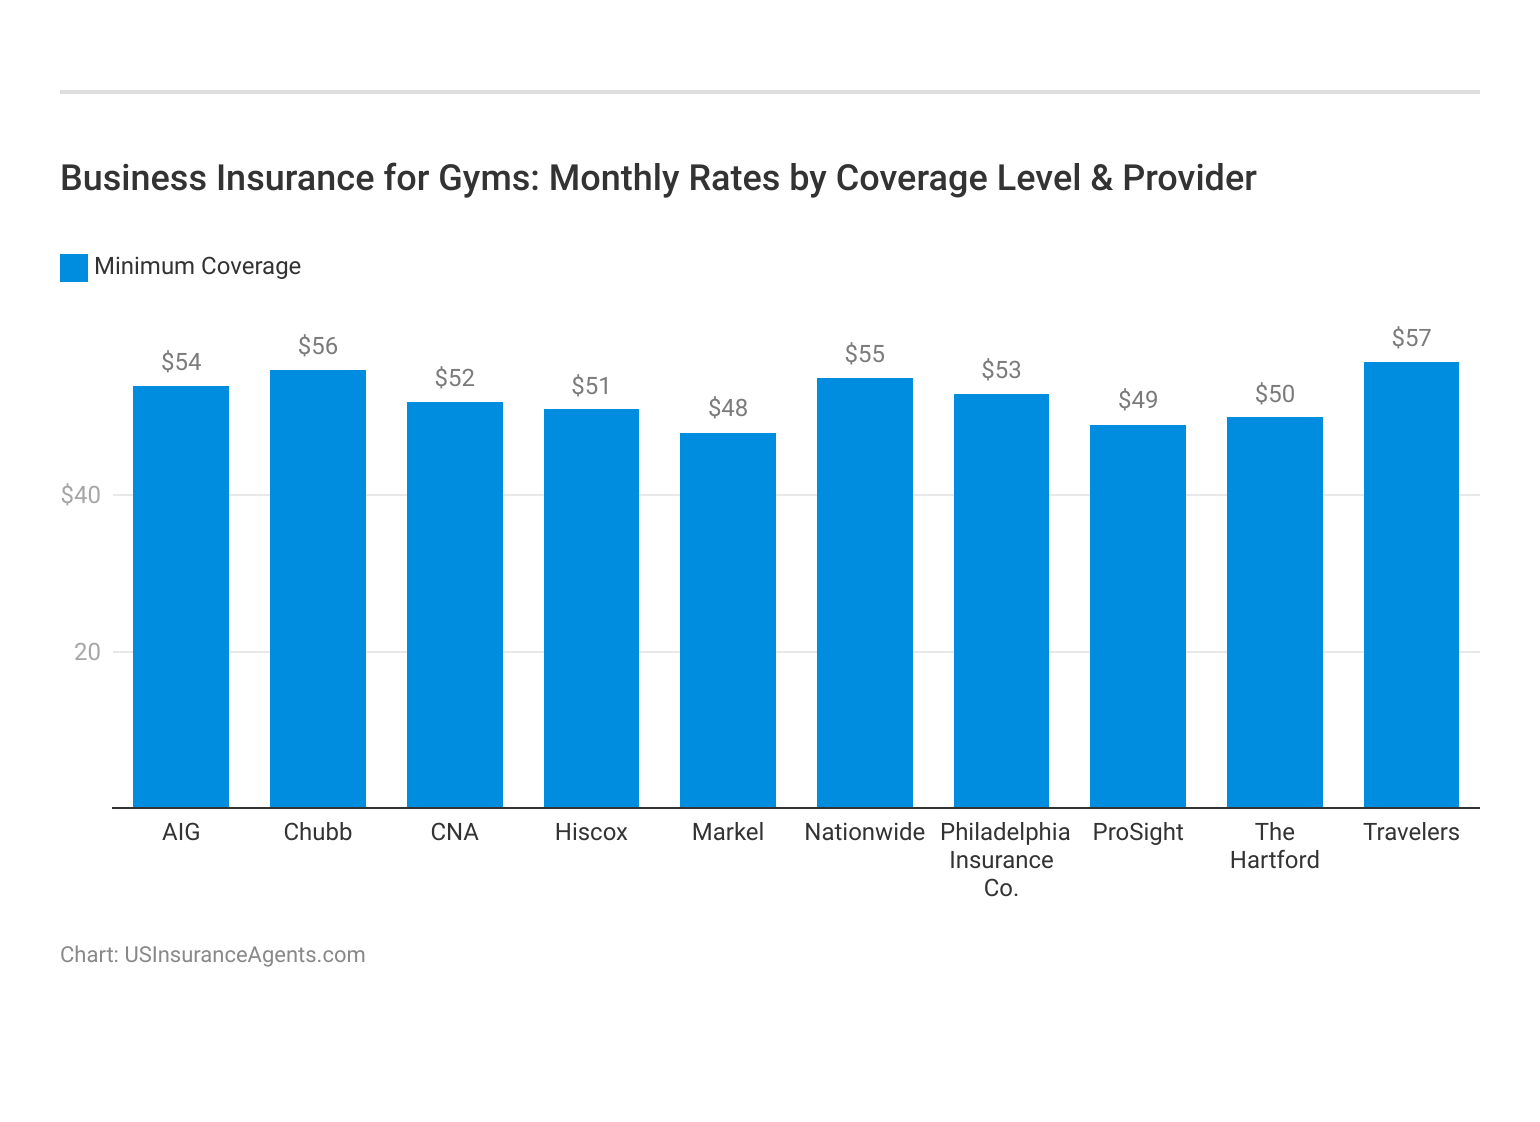 <h3>Business Insurance for Gyms: Monthly Rates by Coverage Level & Provider</h3>